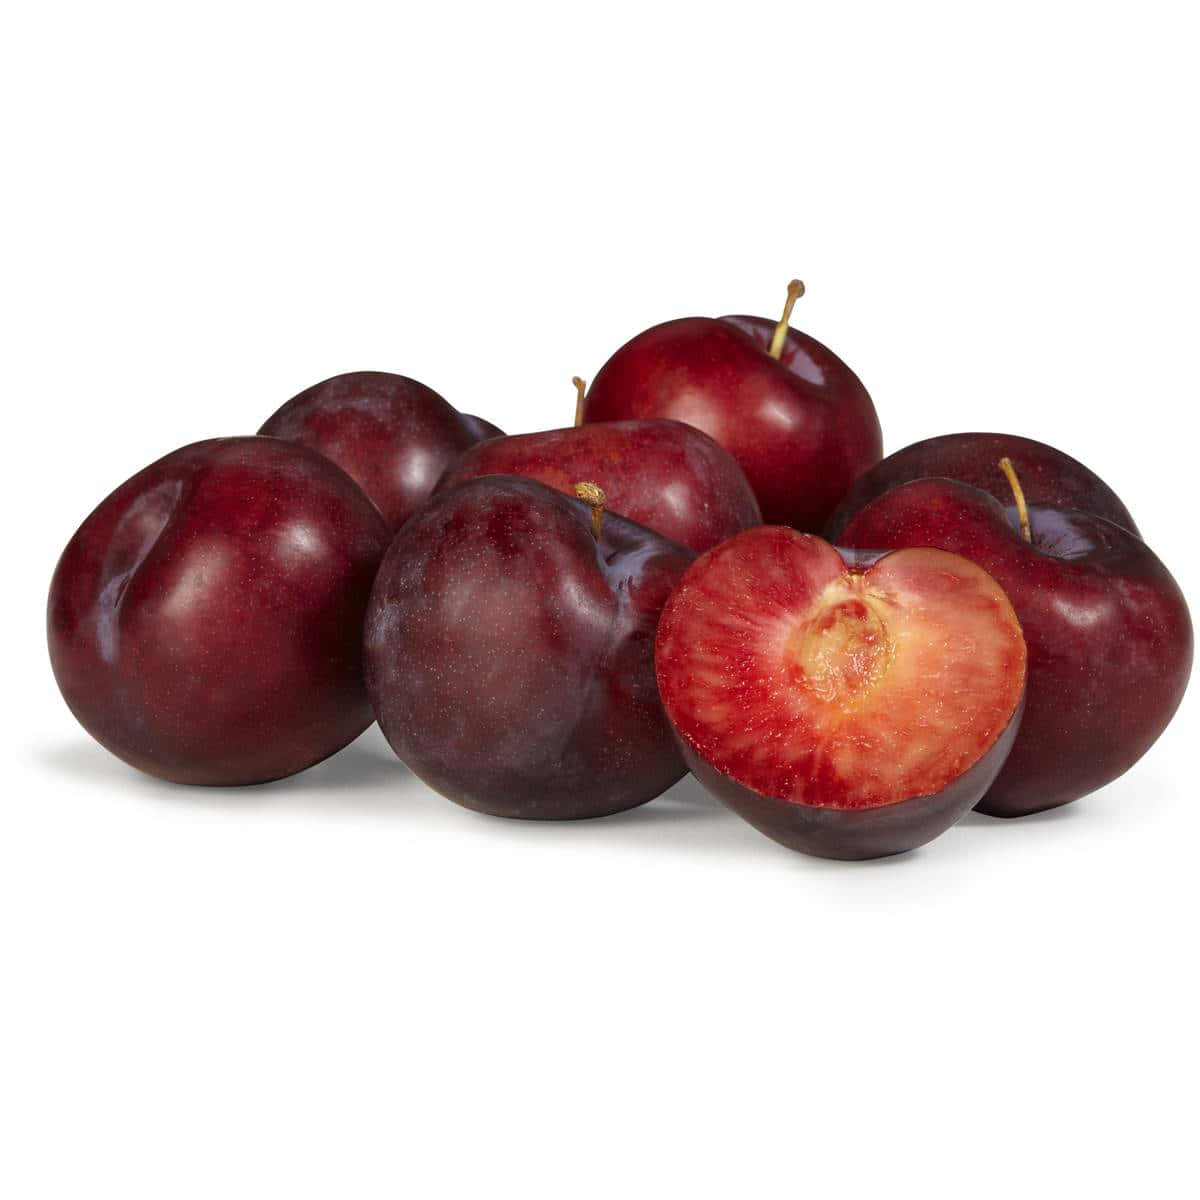 Caption: Juicy Red Plum on Wooden Surface Wallpaper